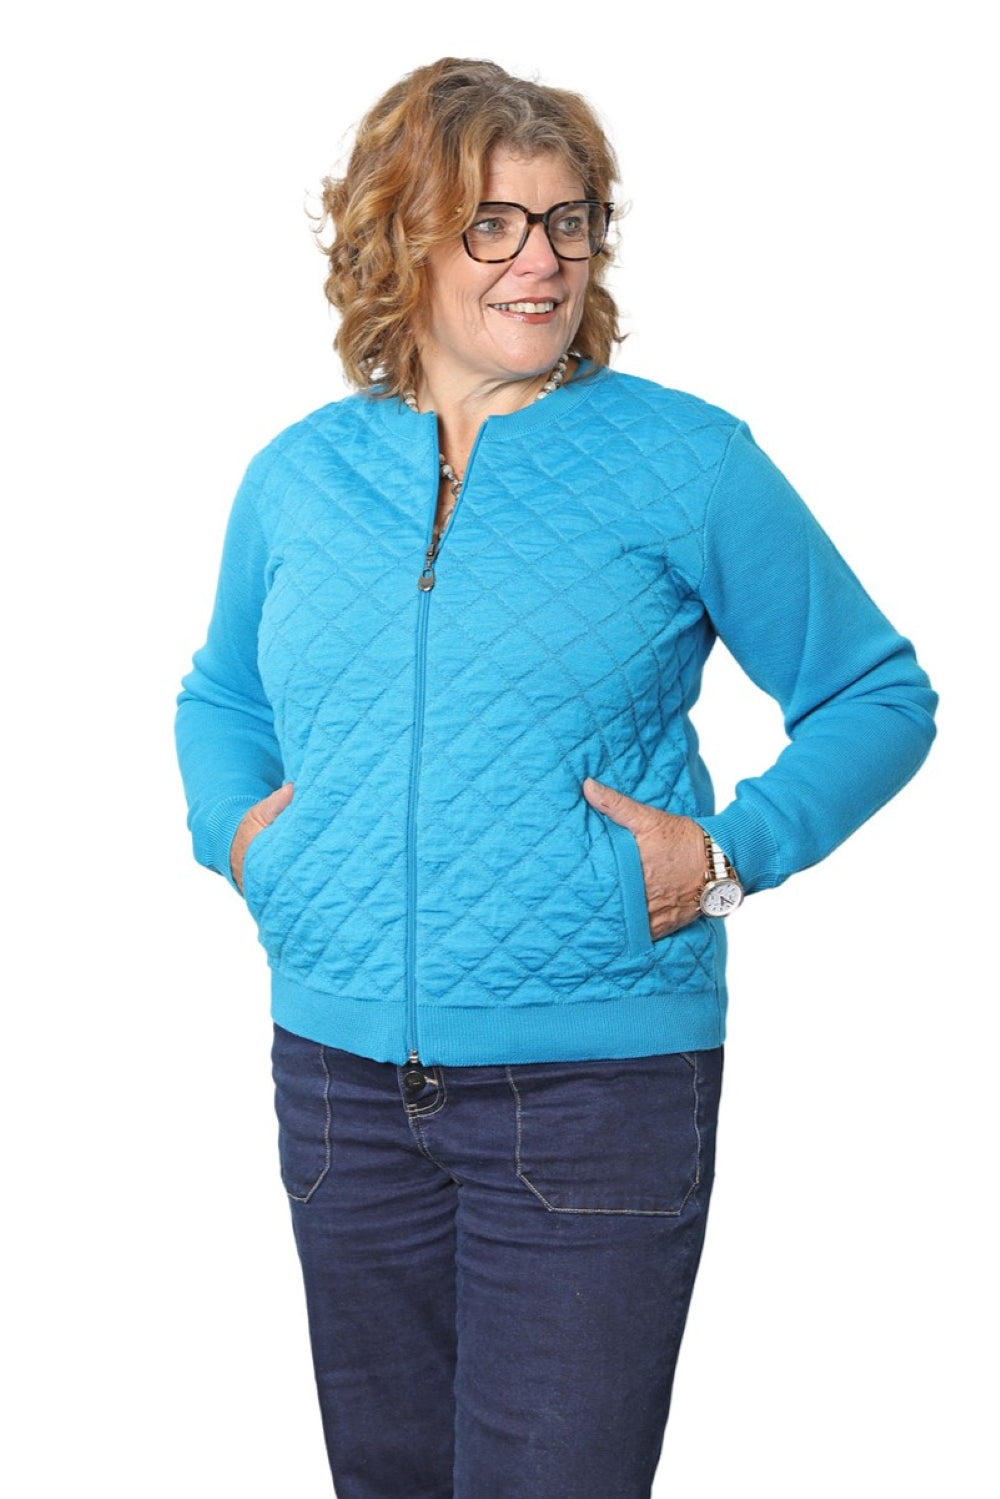 Quilted 100% Merino Zip Jacket with sleeves and pockets